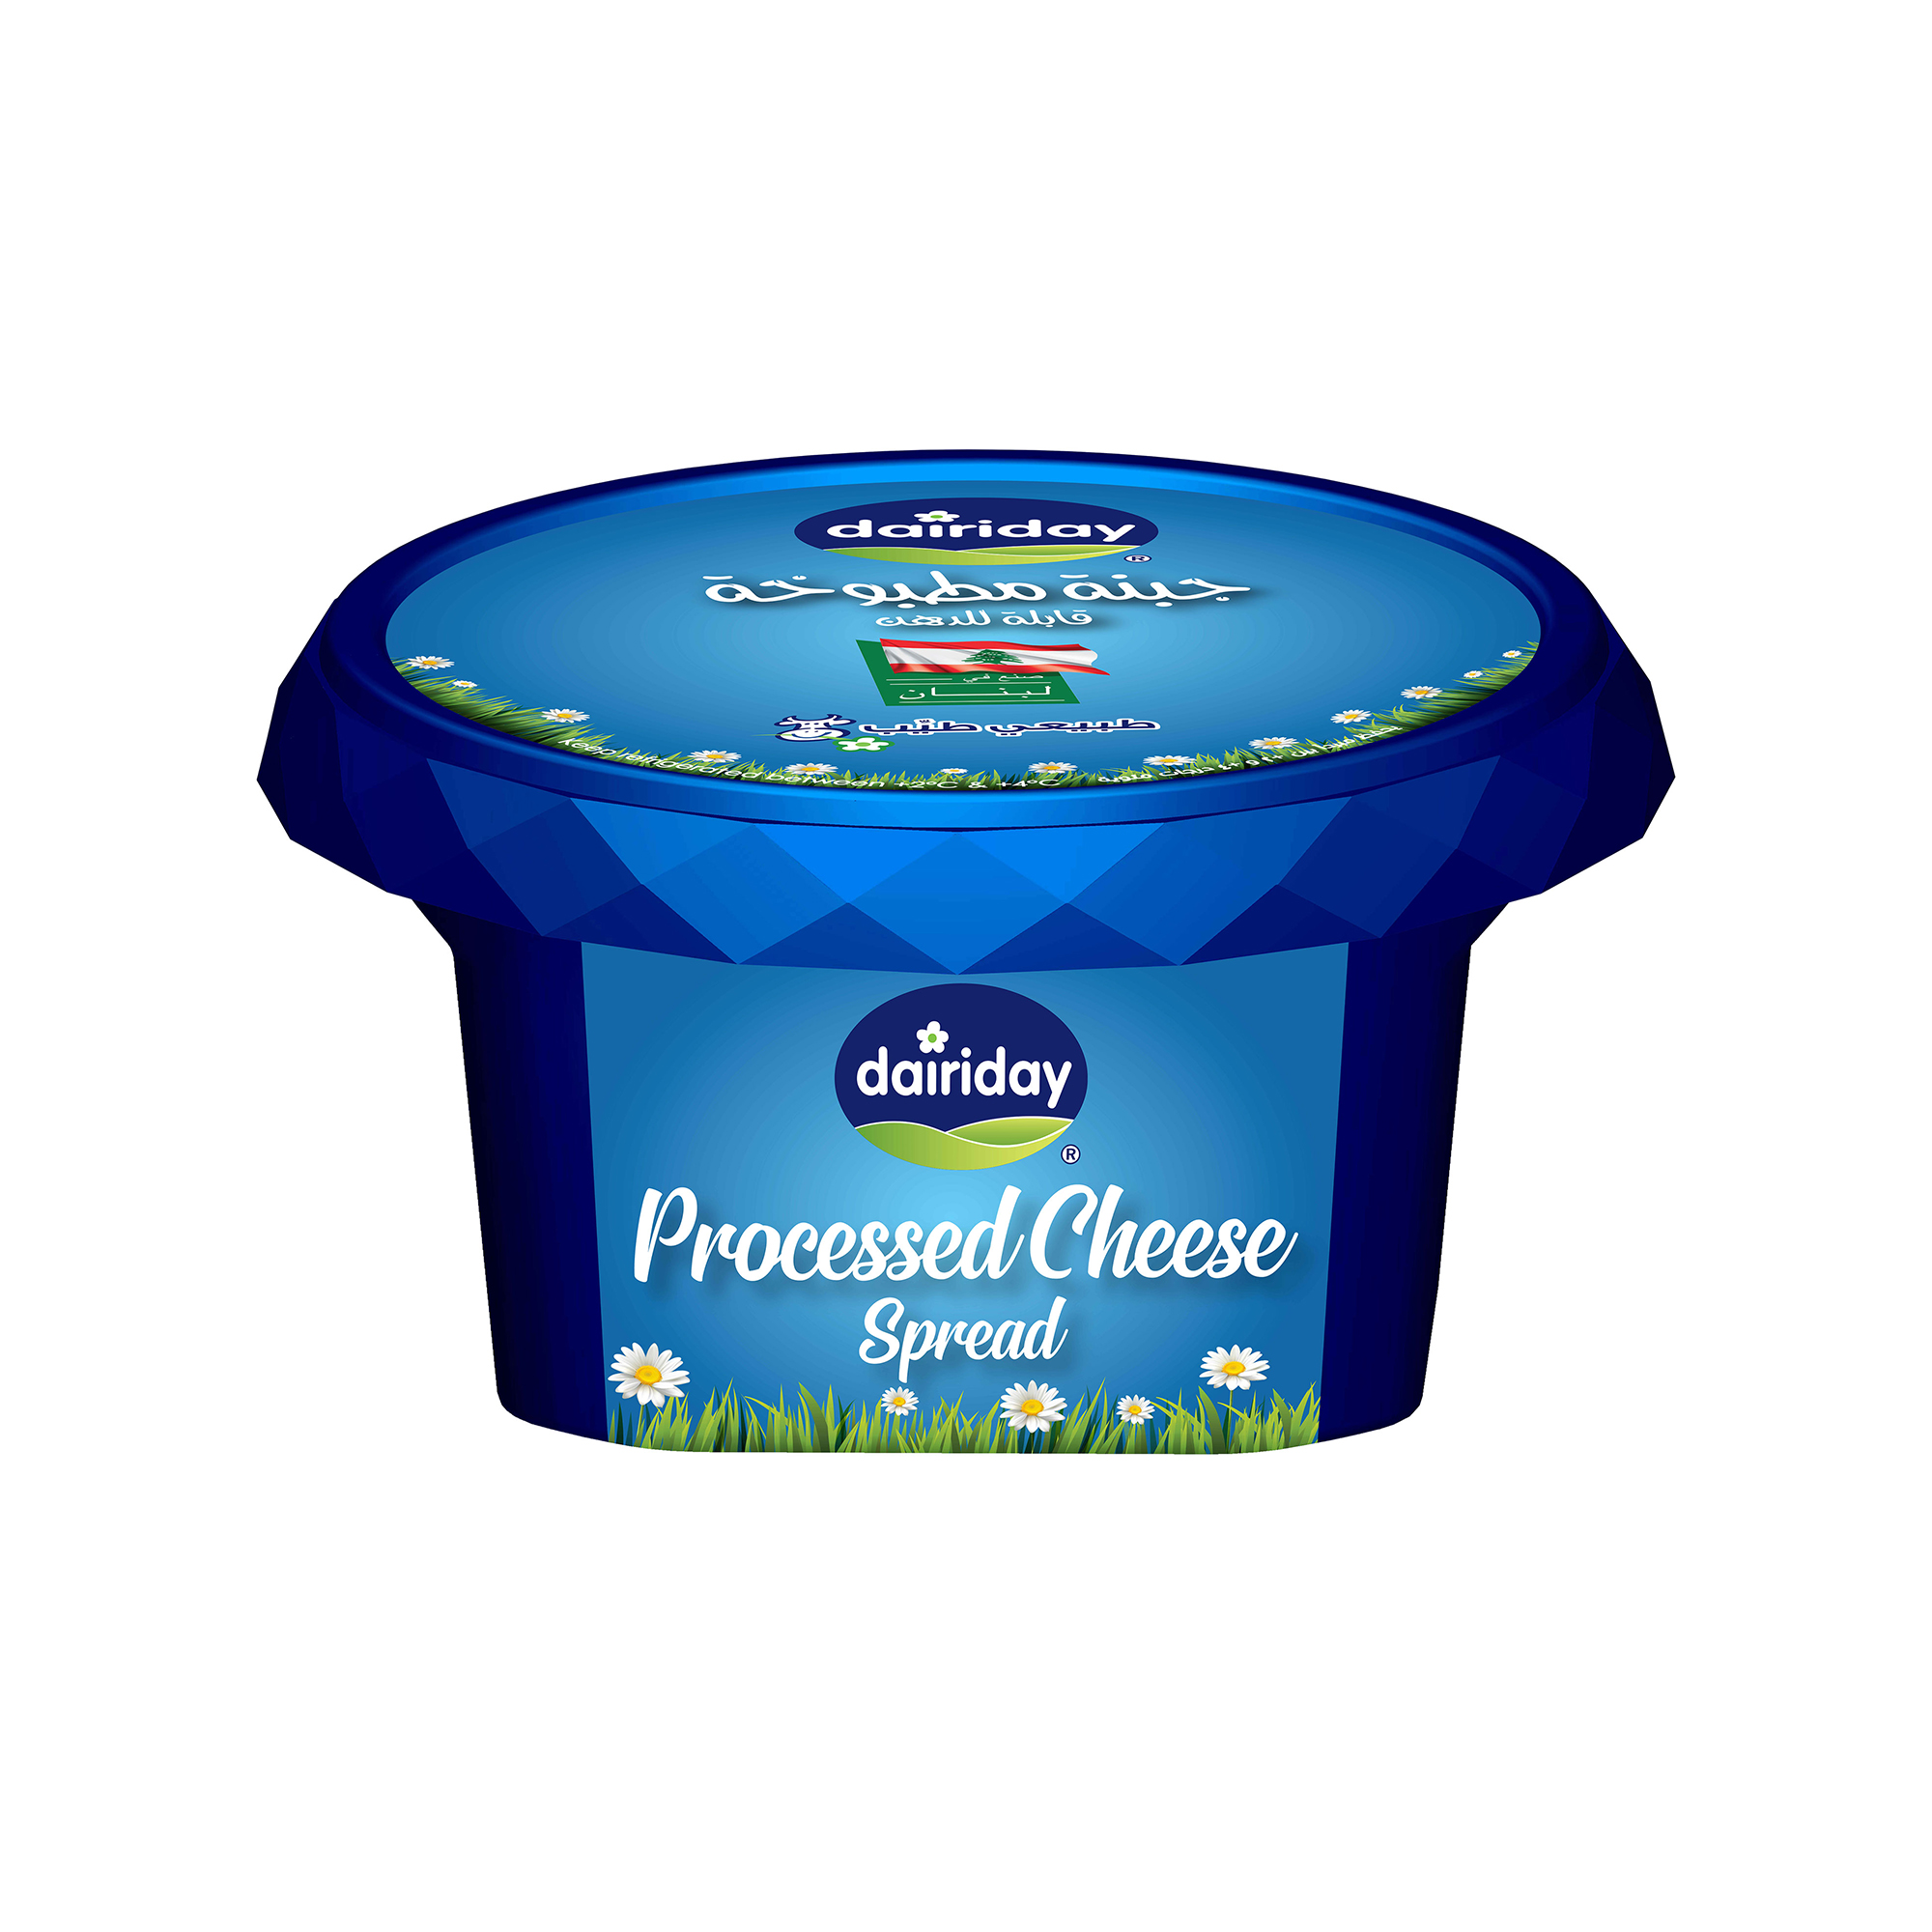 Dairiday-Processed-Cheese-Spread-150g